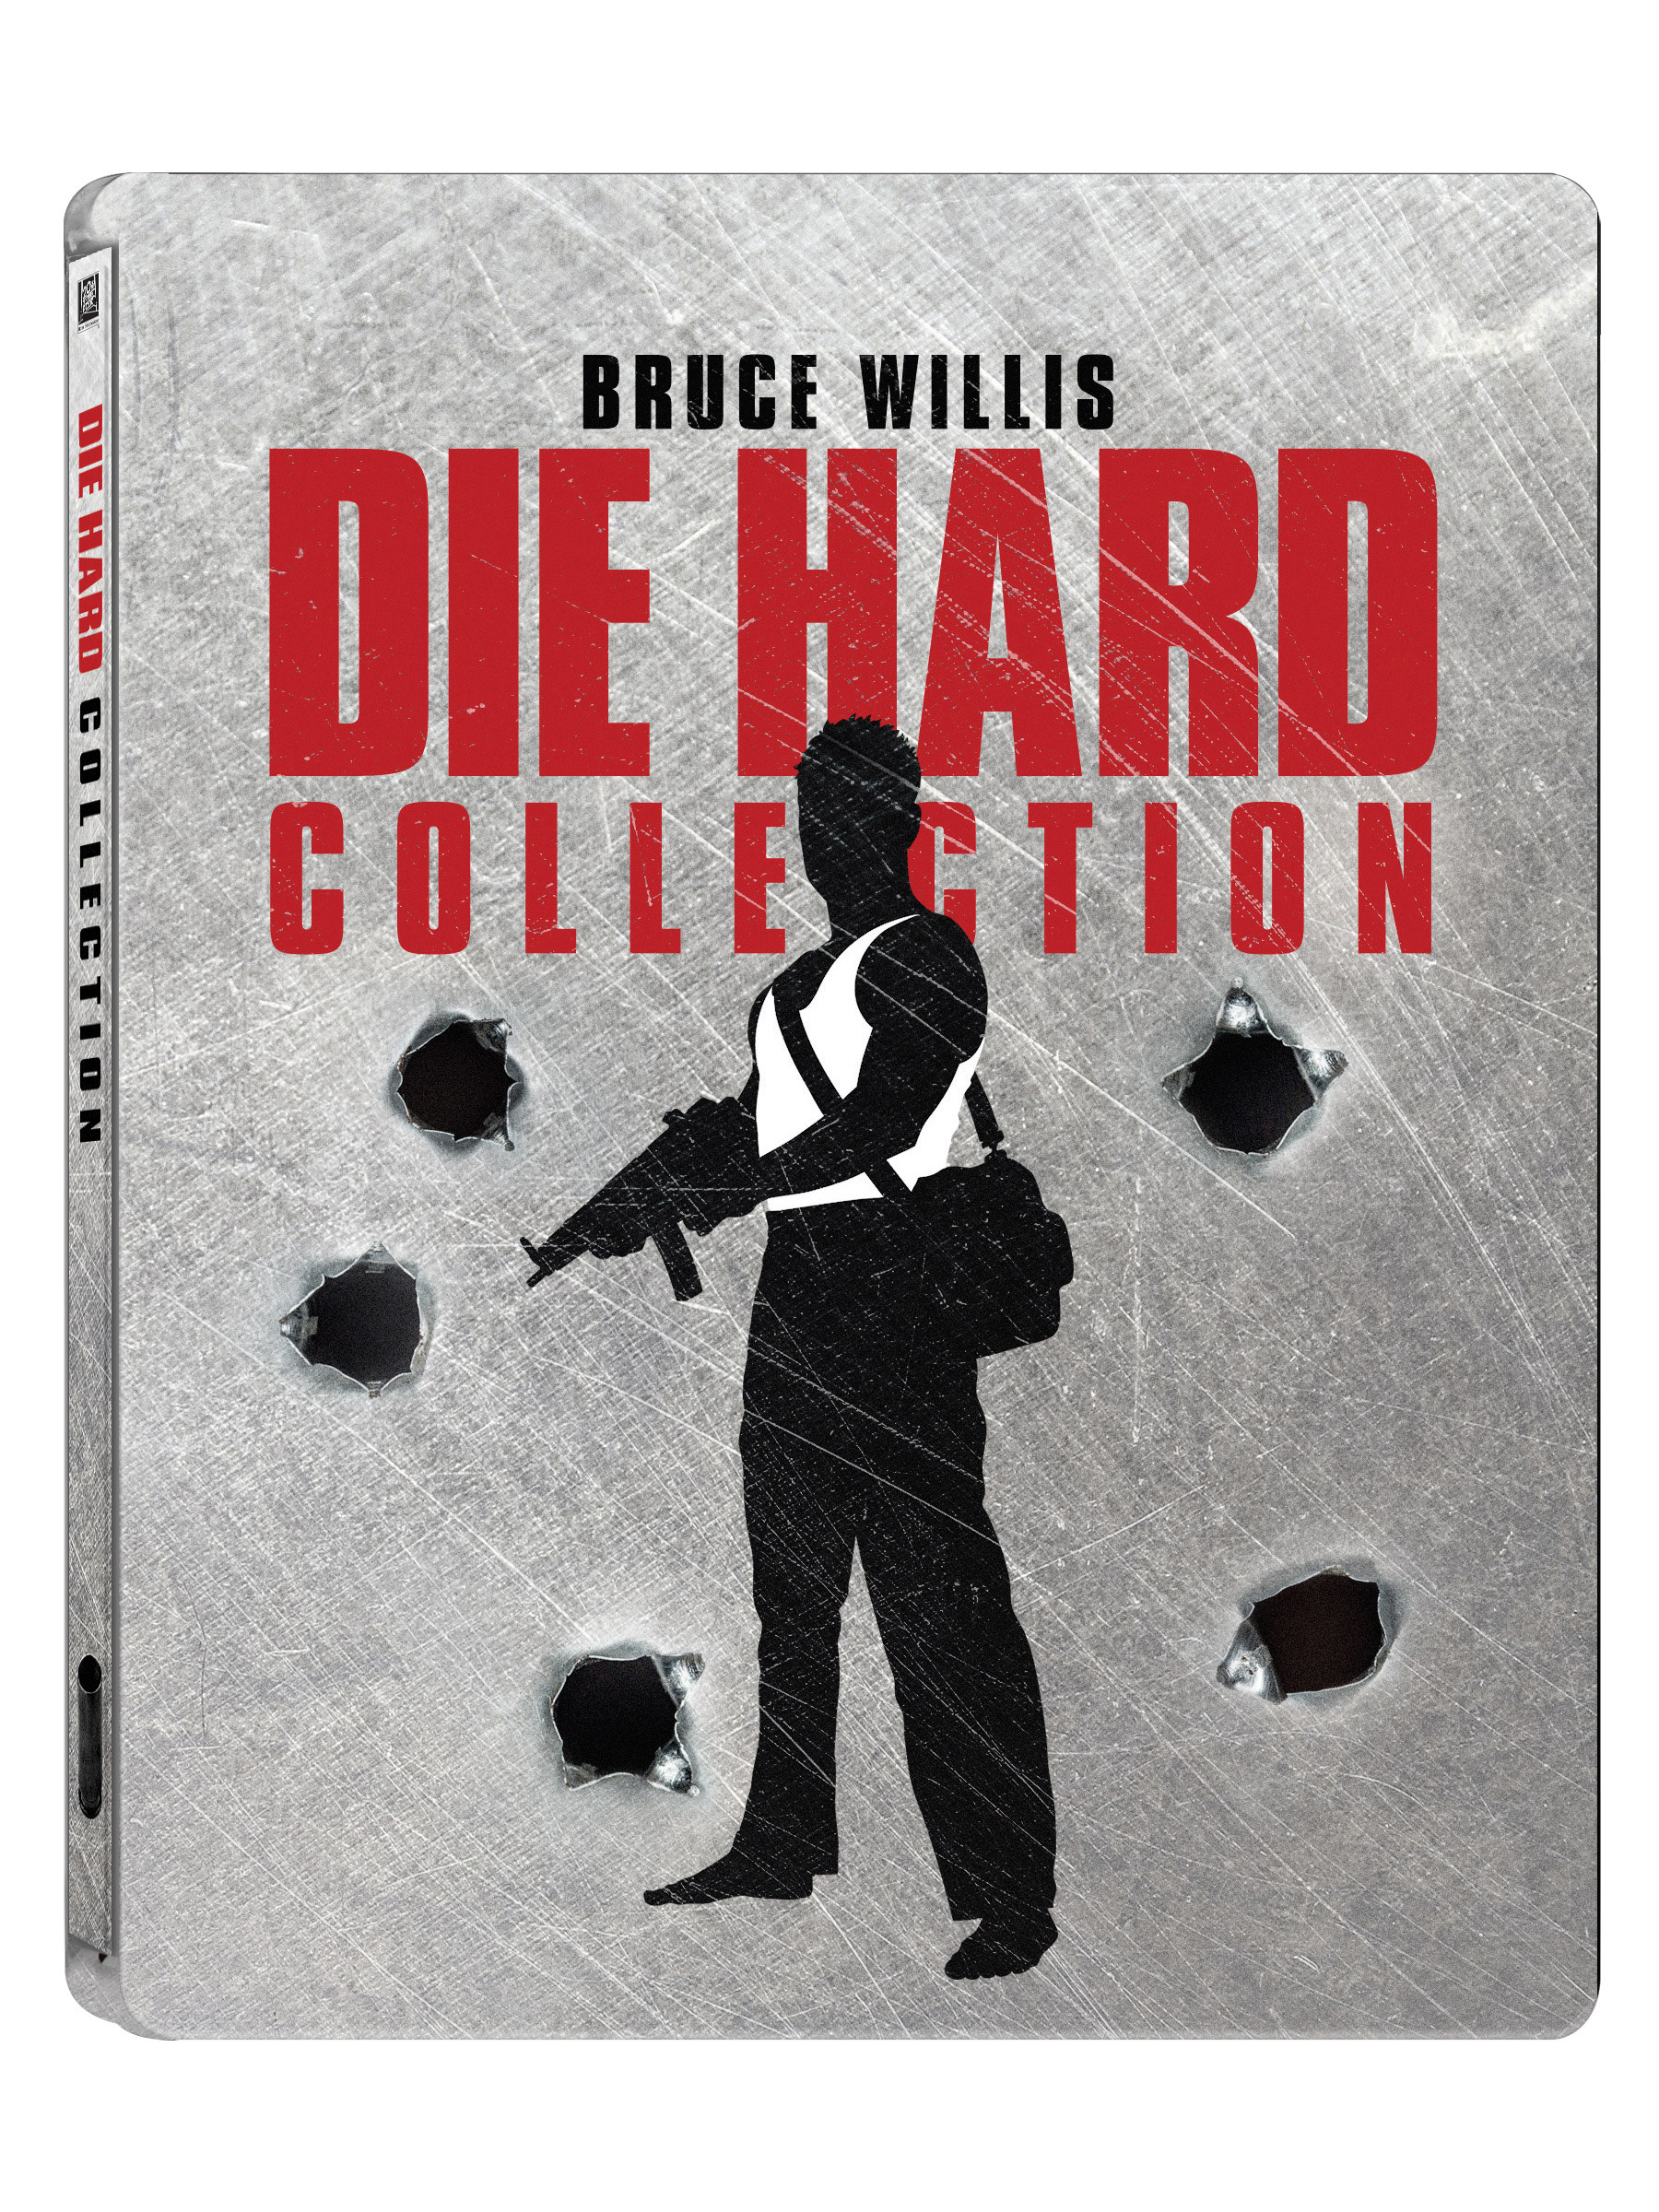 Die Hard Steel Book Combo cover (20th Century Fox Home Entertainment)